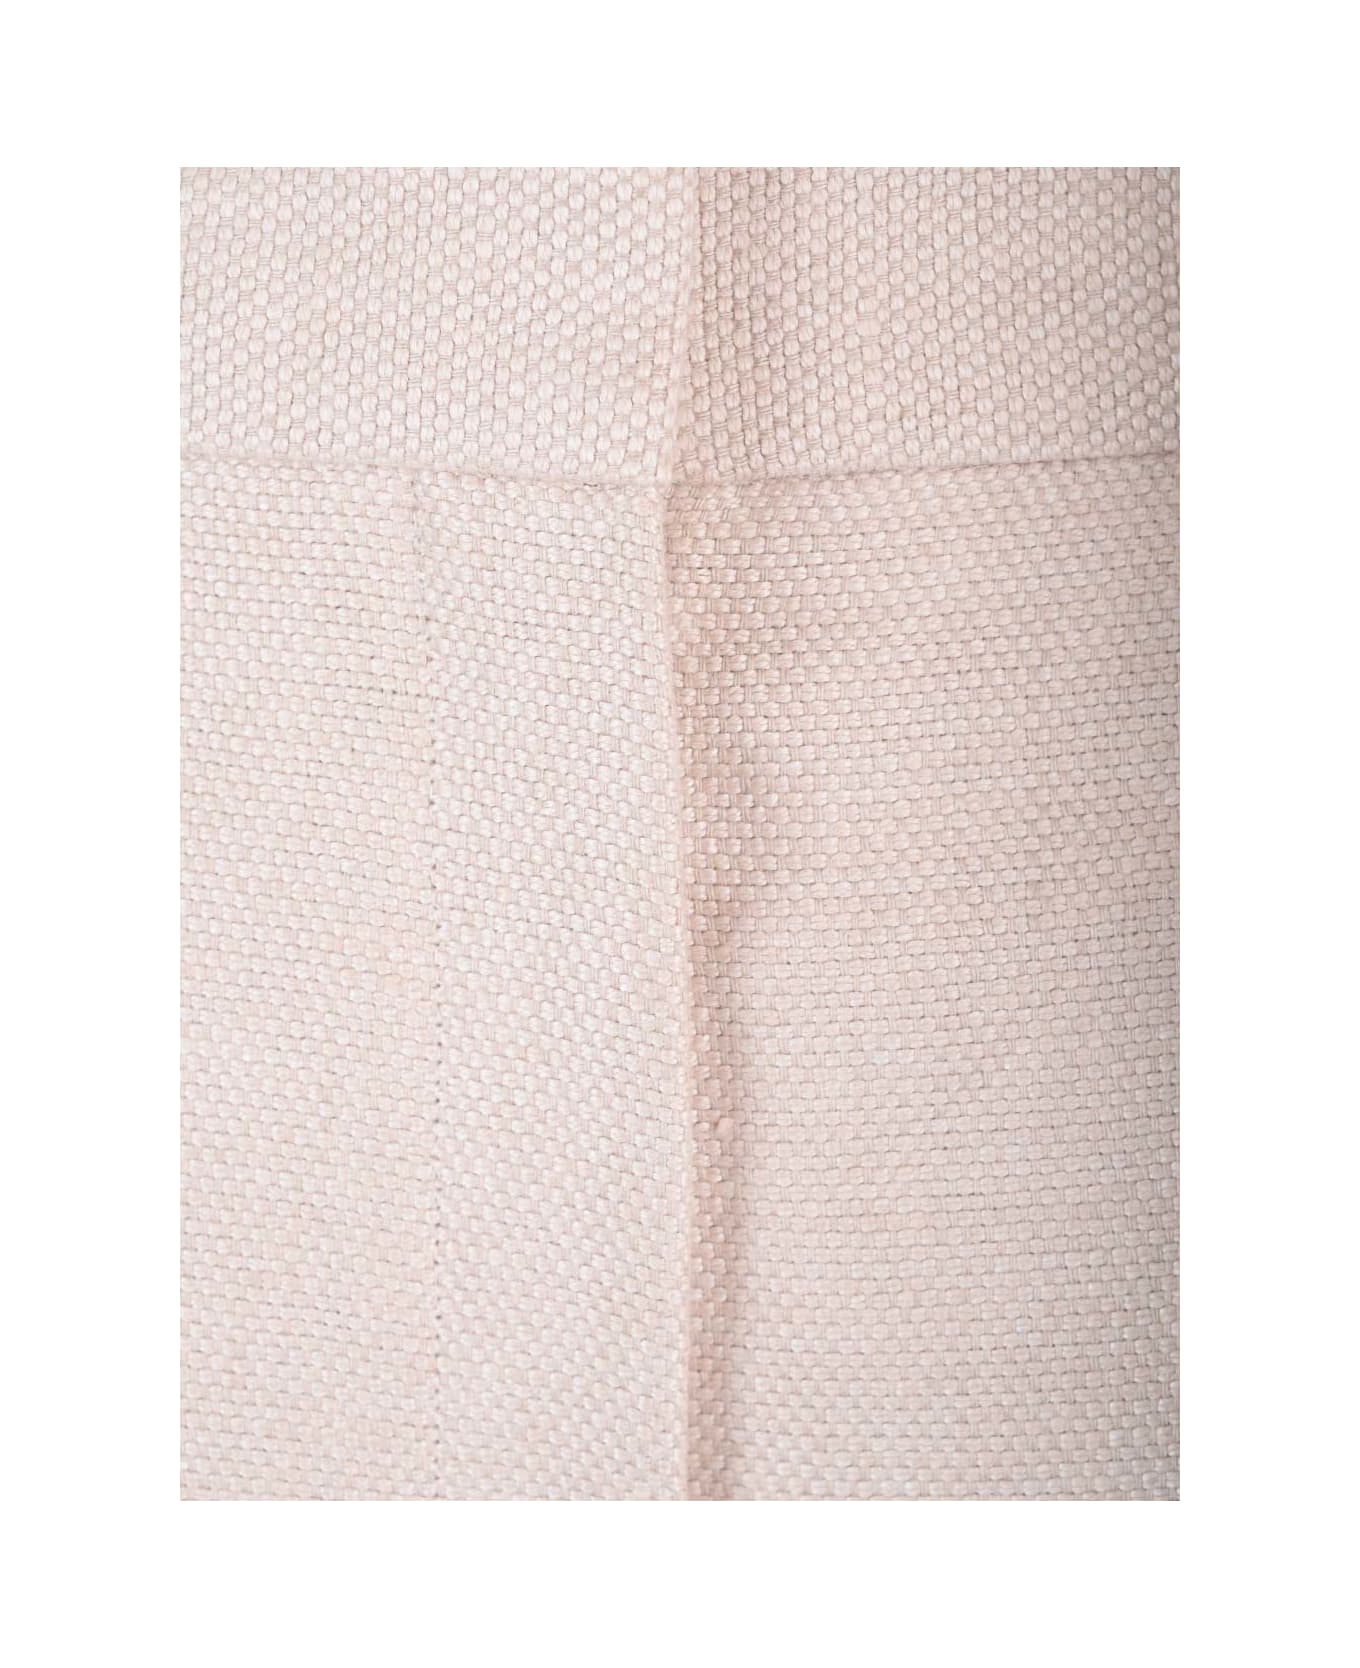 Theory High-waisted Trousers In Linen Twill - NEUTRALS